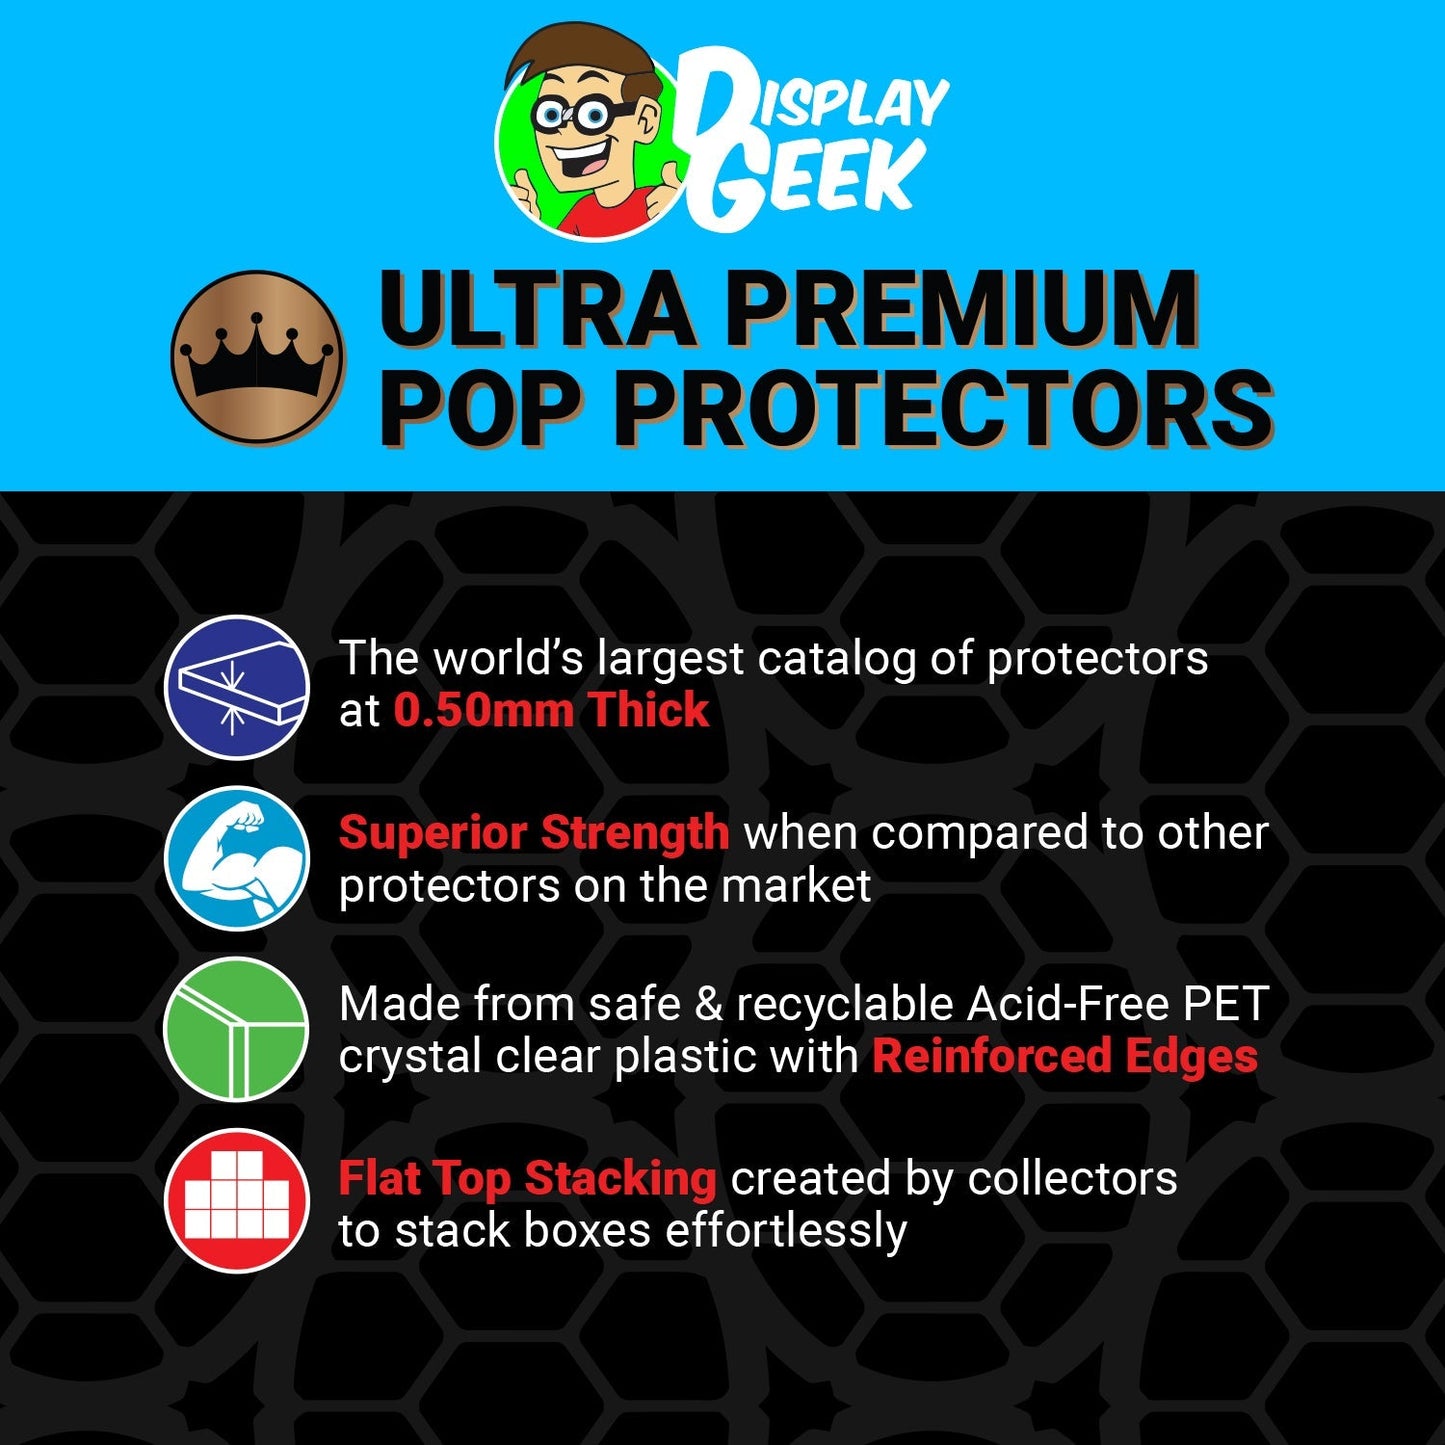 Pop Protector for 10 inch Wayne Gretzky #72 Jumbo Funko Pop - PPG Pop Protector Guide Search Created by Display Geek